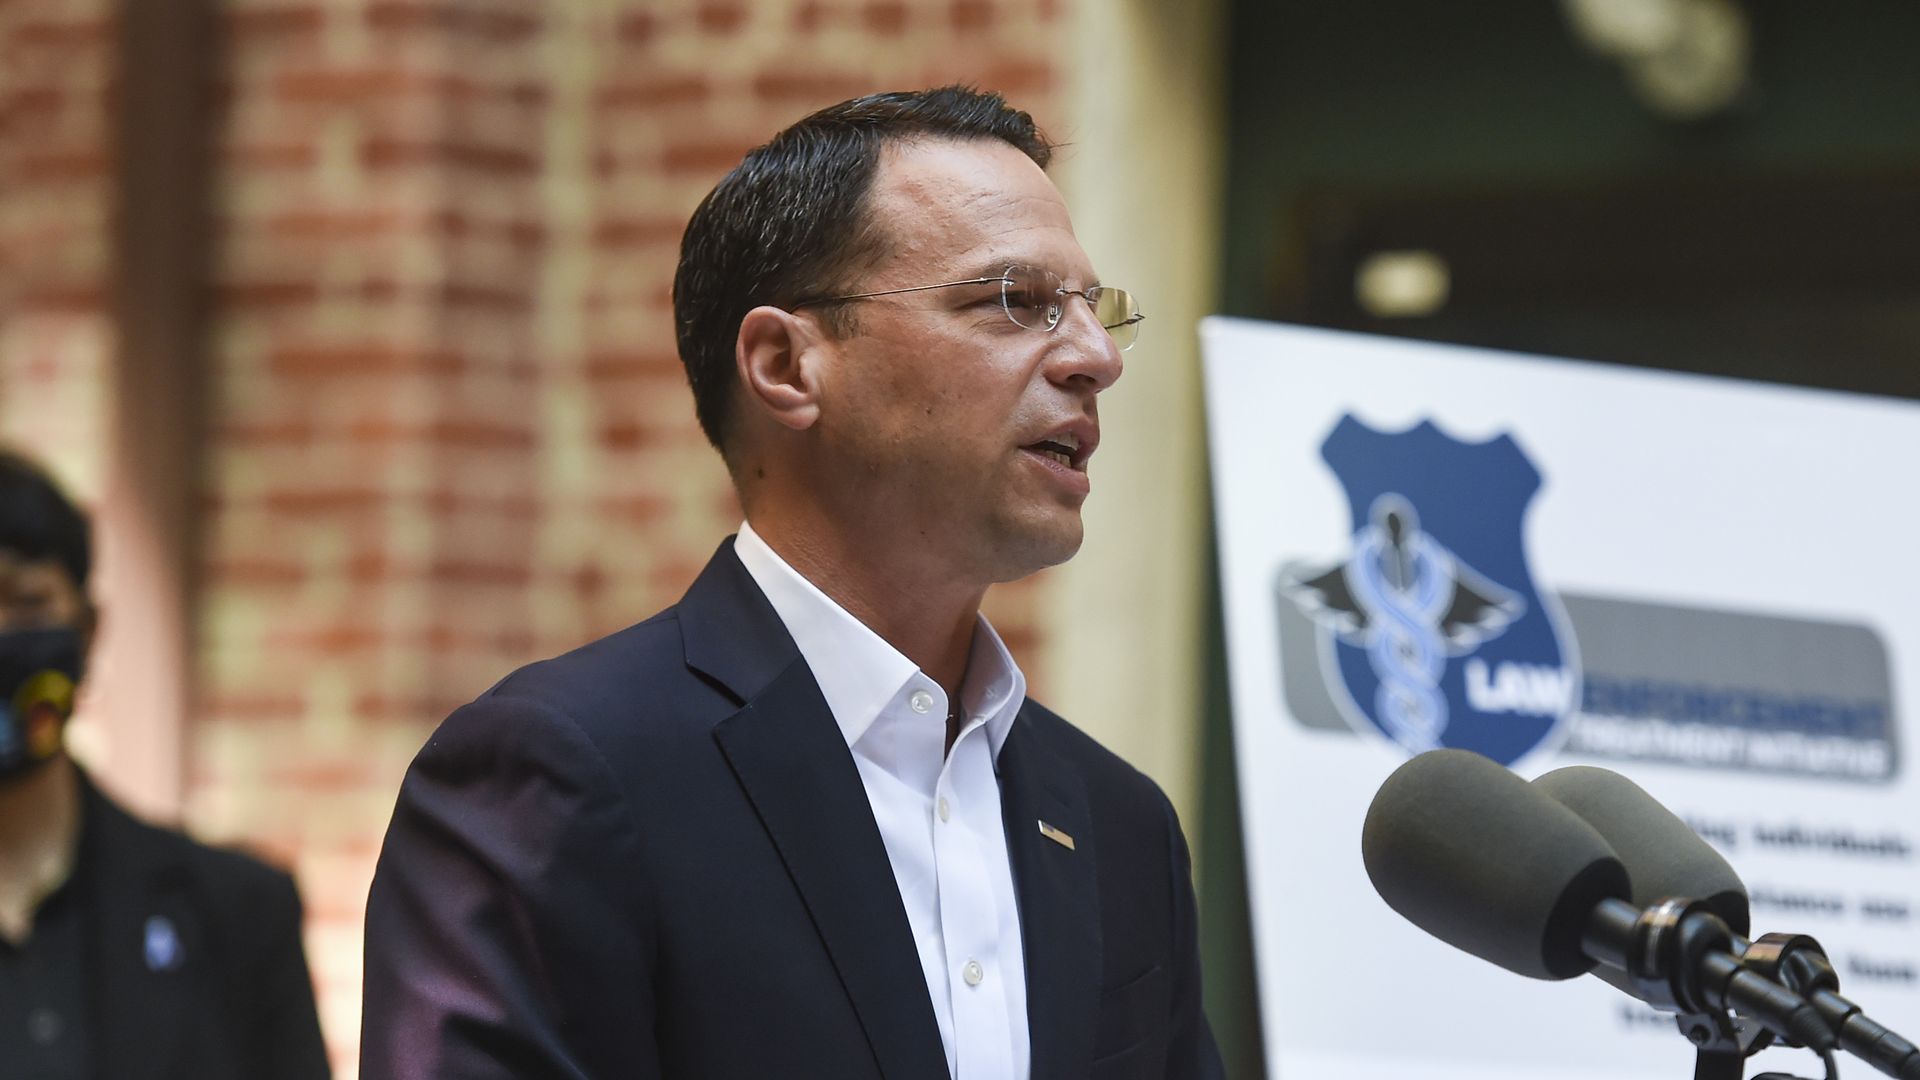 Pennsylvania Attorney General Josh Shapiro speiaks during the press conference. At the Council on Chemical Abuse (COCA) RISE Center in Reading, PA Tuesday morning April 13, 2021